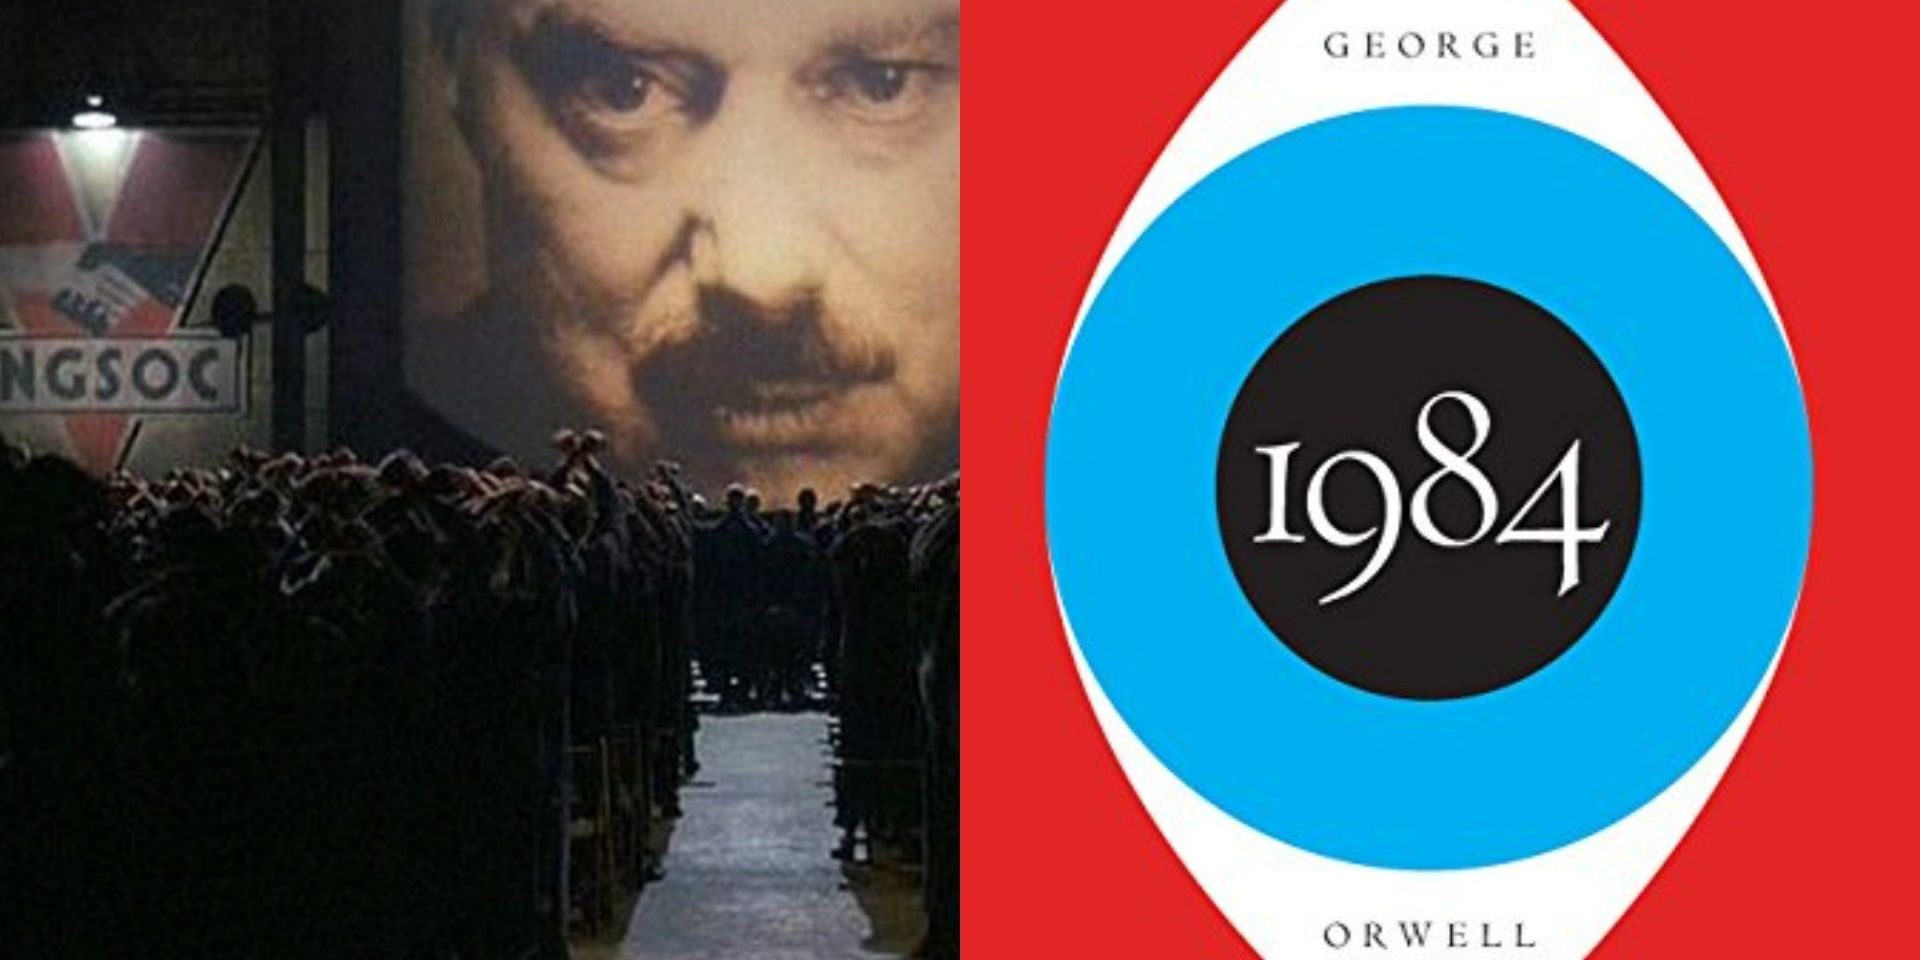 (Left) 1984 movie scene of man on screen / (Right) 1984 book cover with eye in the middle